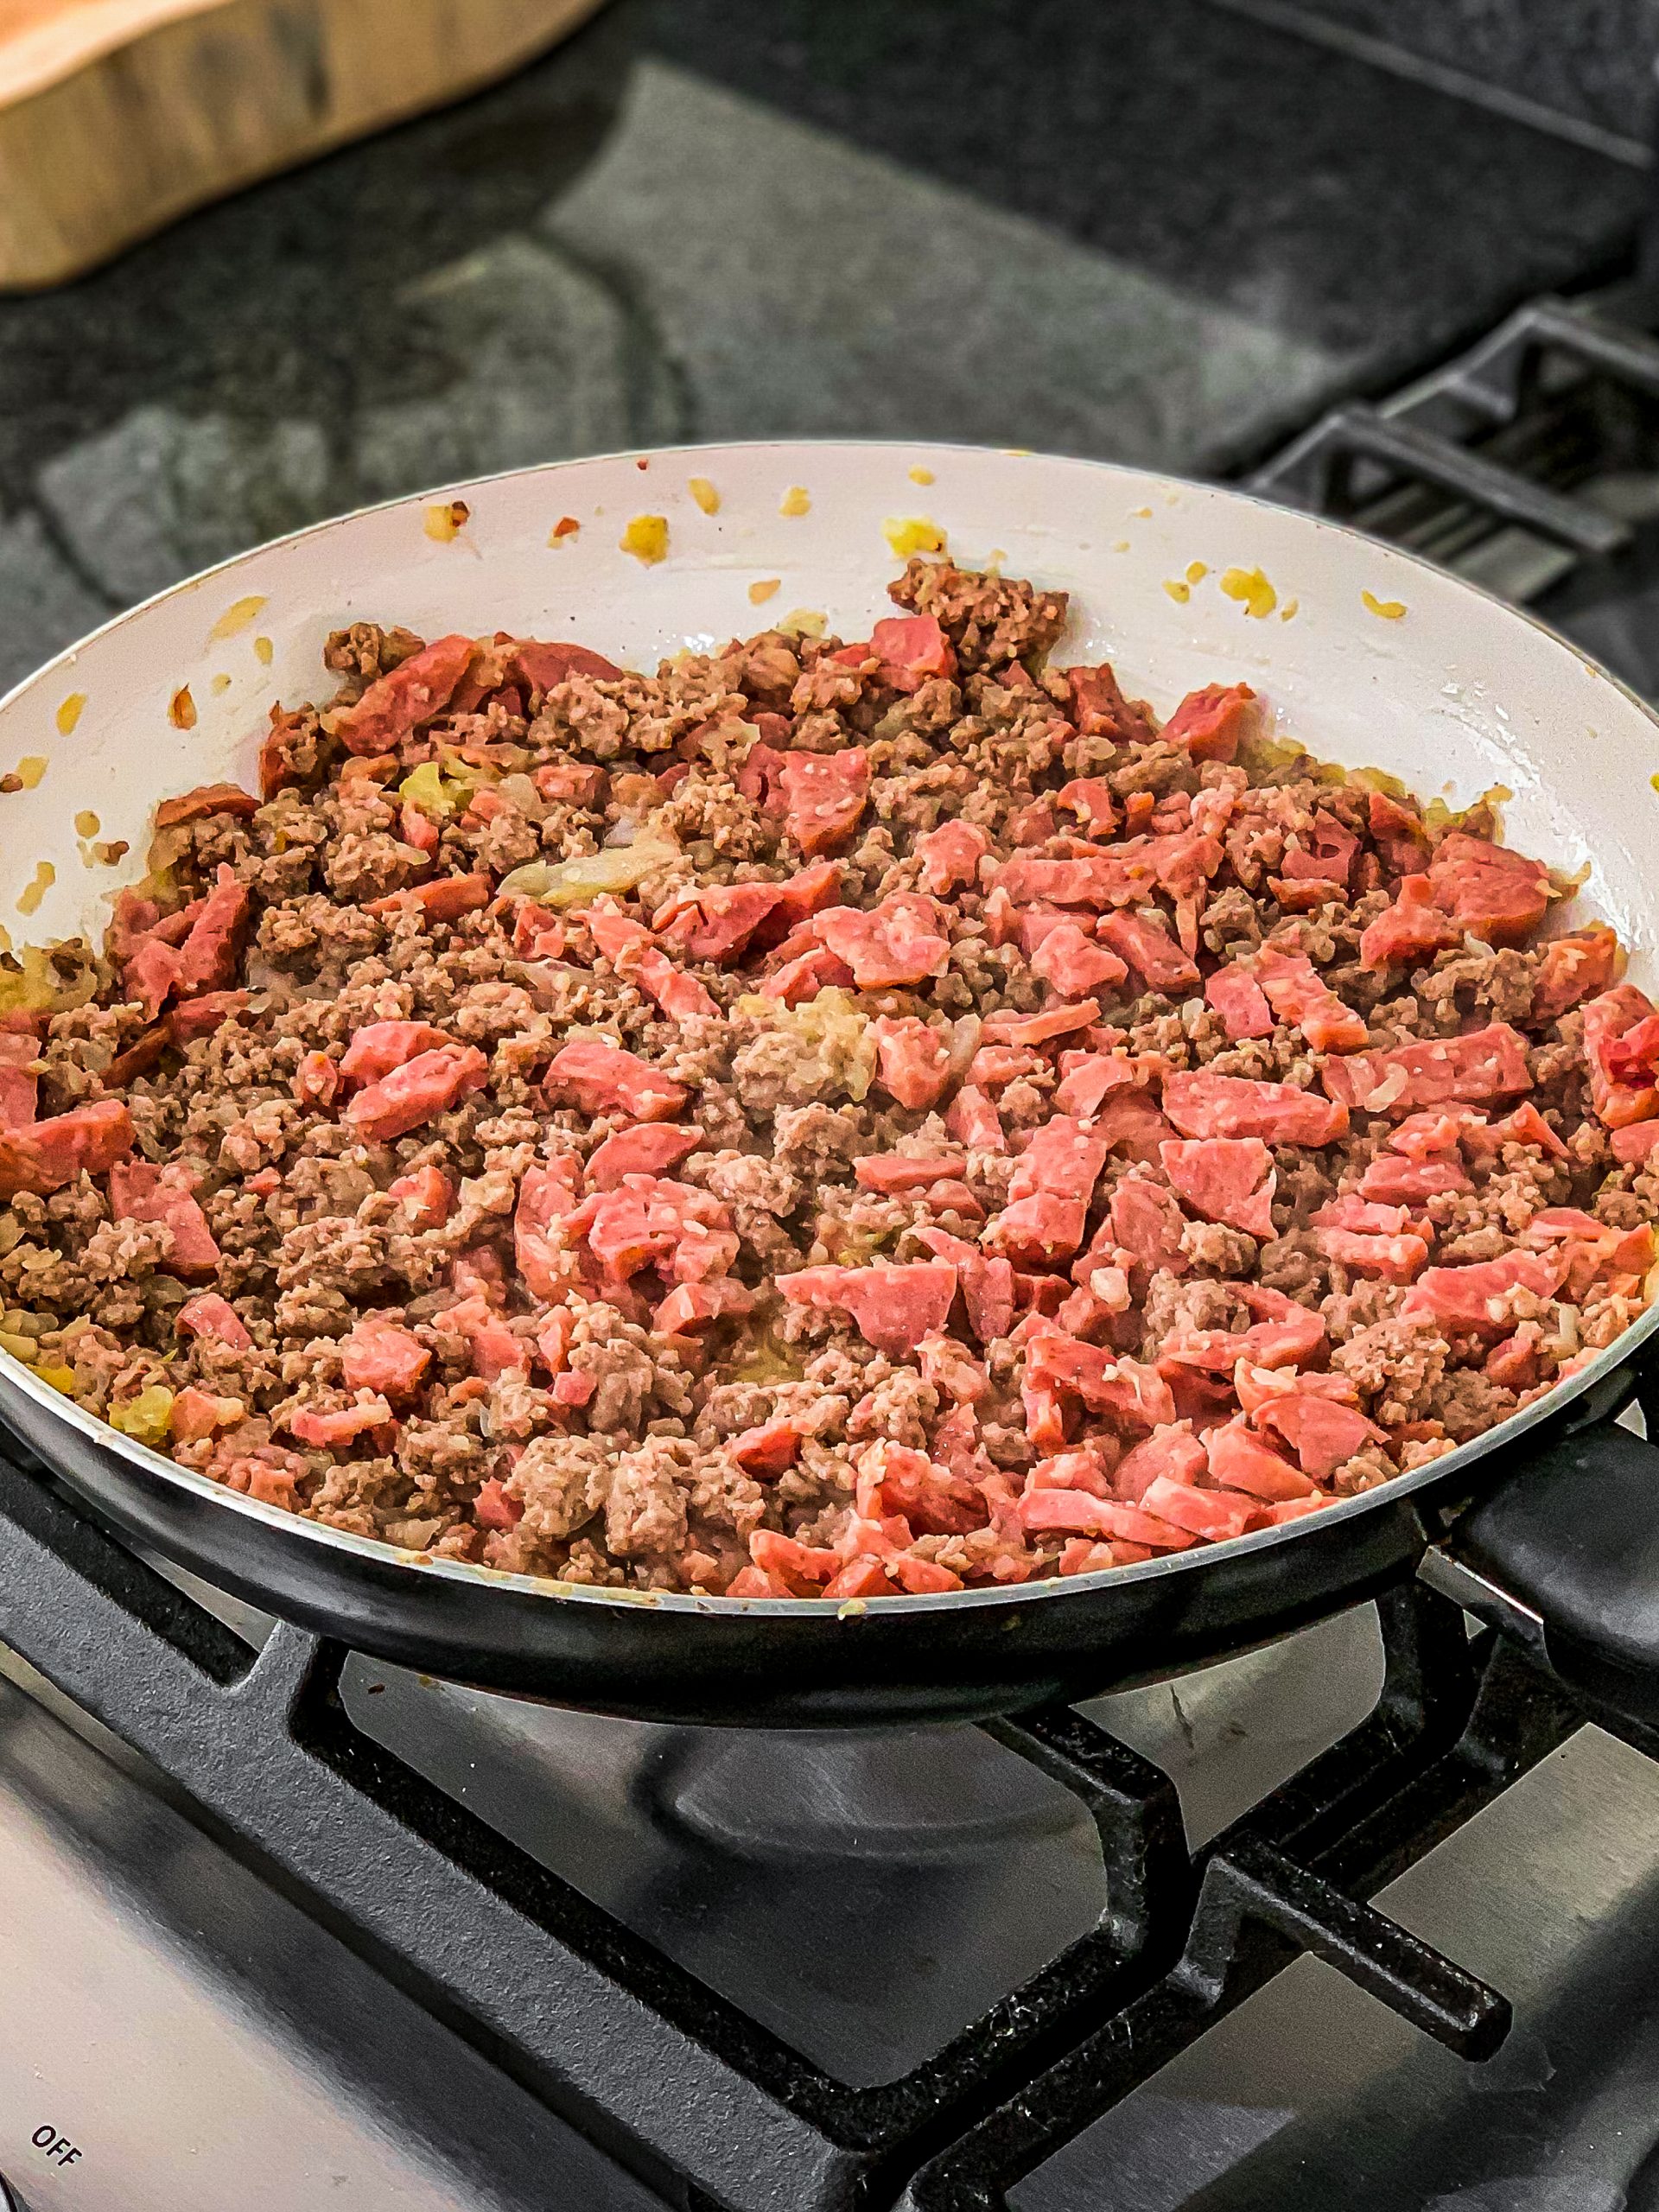 Add the ground beef along with the sausage, and cook until golden brown.